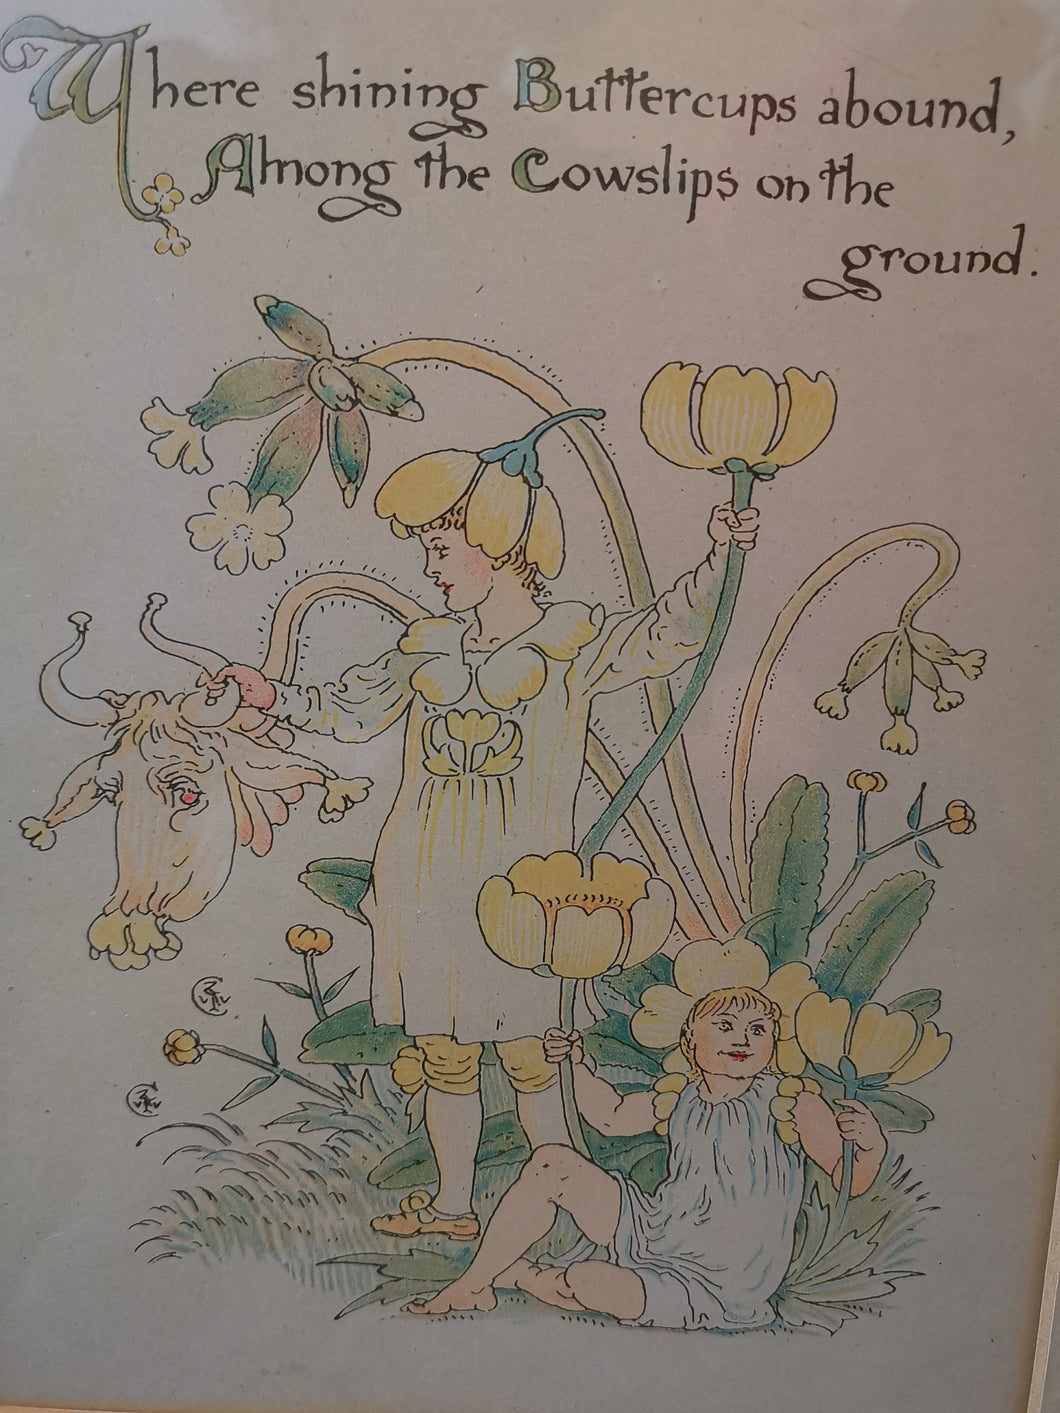 Antique Walter Crane Buttercups and Cowslips Lithograph Print Illustration Hand Tinted Framed